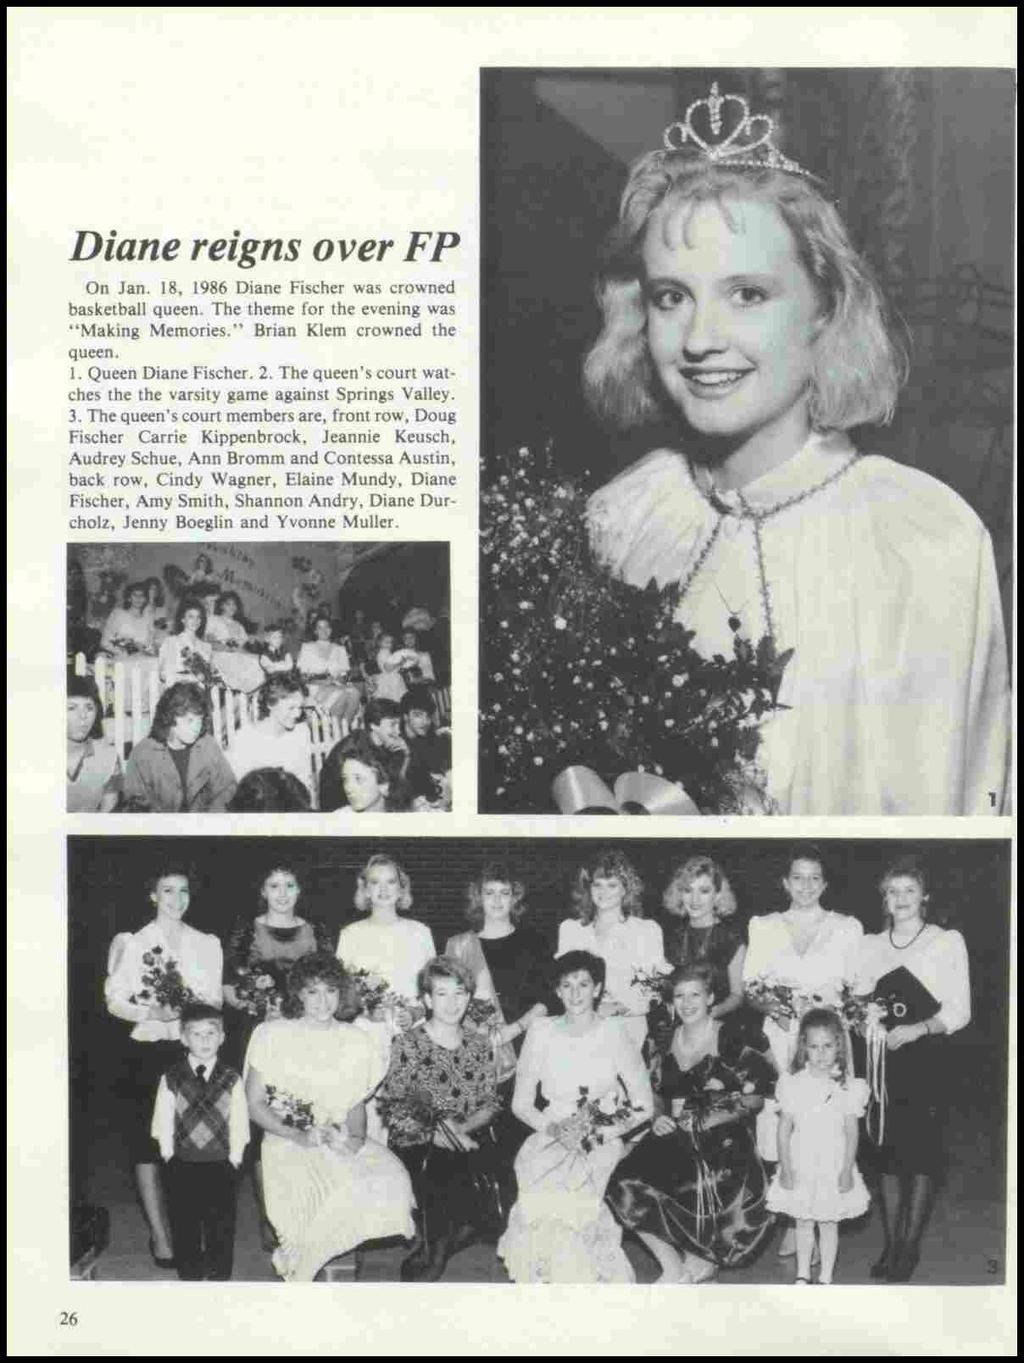 Diane reigns over FP On Jan. 18, 1986 Diane Fischer was crowned basketball queen. The theme for the evening was "Making Memories." Brian Klem crowned the queen. 1. Queen Diane Fischer. 2.